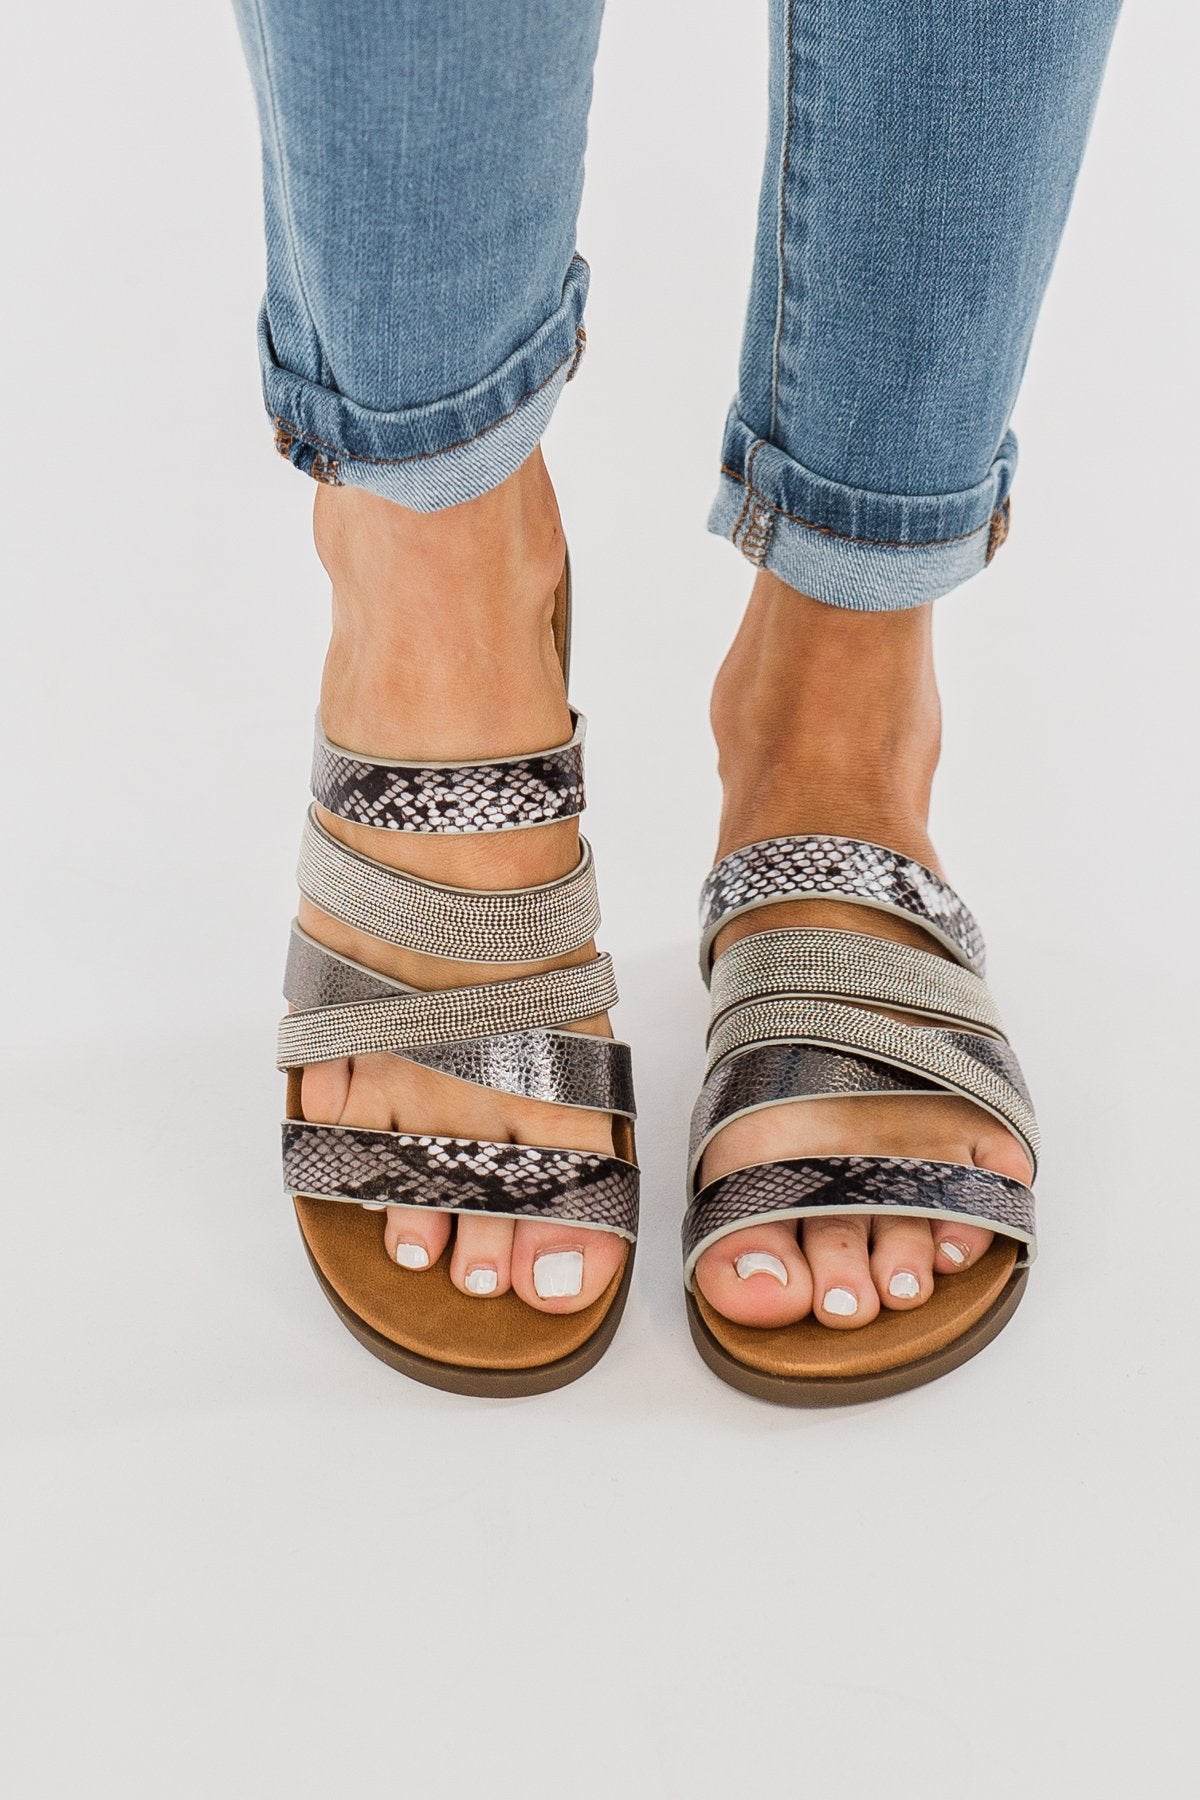 Very G Ginger 2 Sandals- Pewter